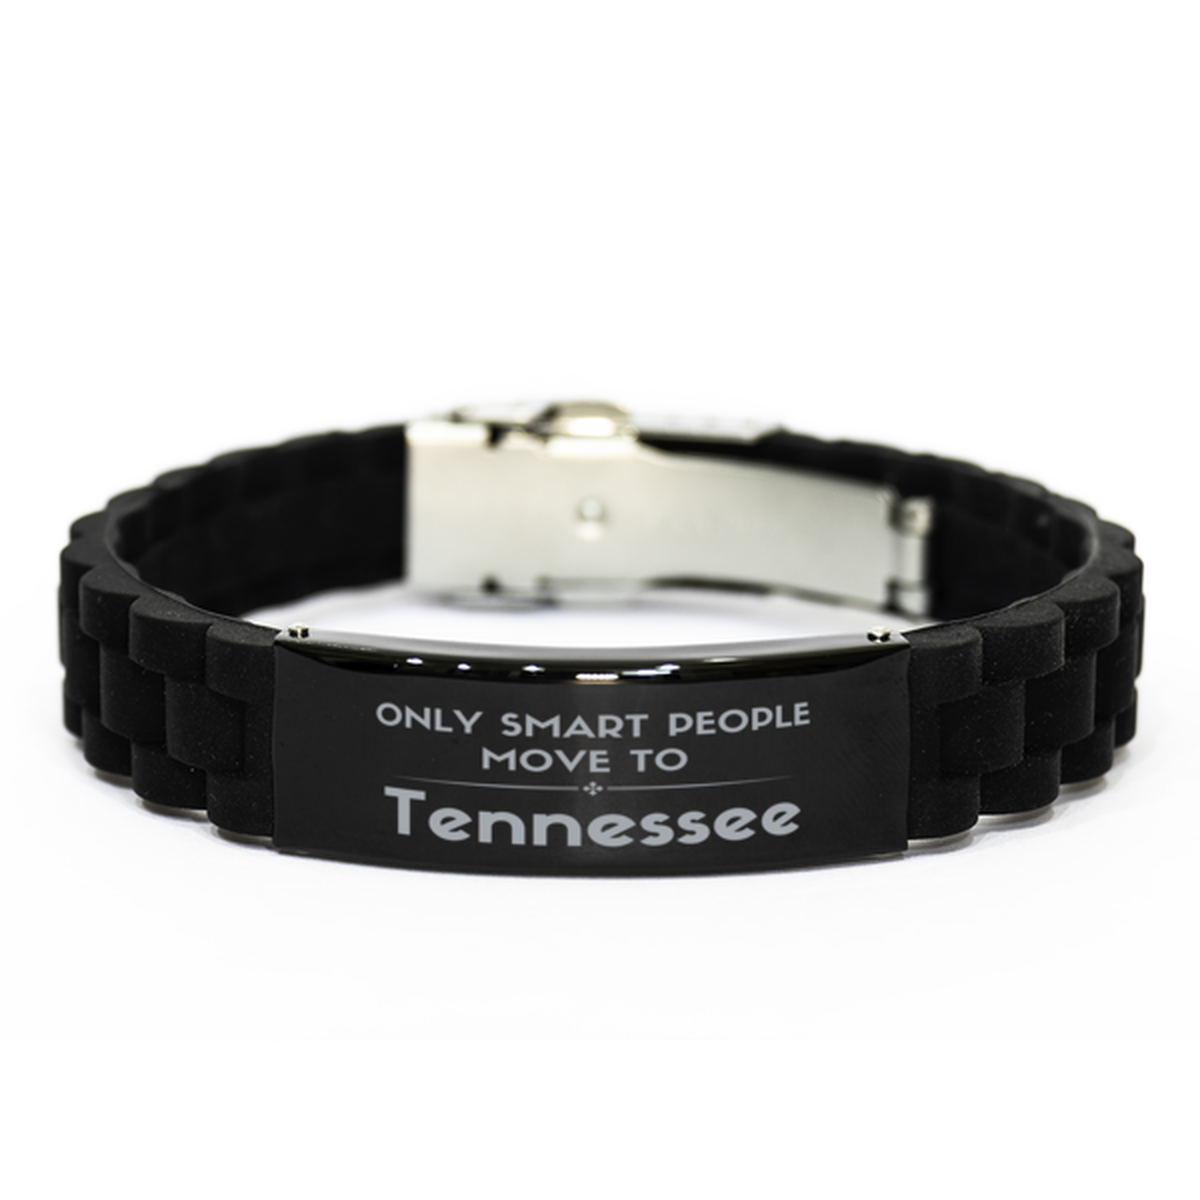 Only smart people move to Tennessee Black Glidelock Clasp Bracelet, Gag Gifts For Tennessee, Move to Tennessee Gifts for Friends Coworker Funny Saying Quote